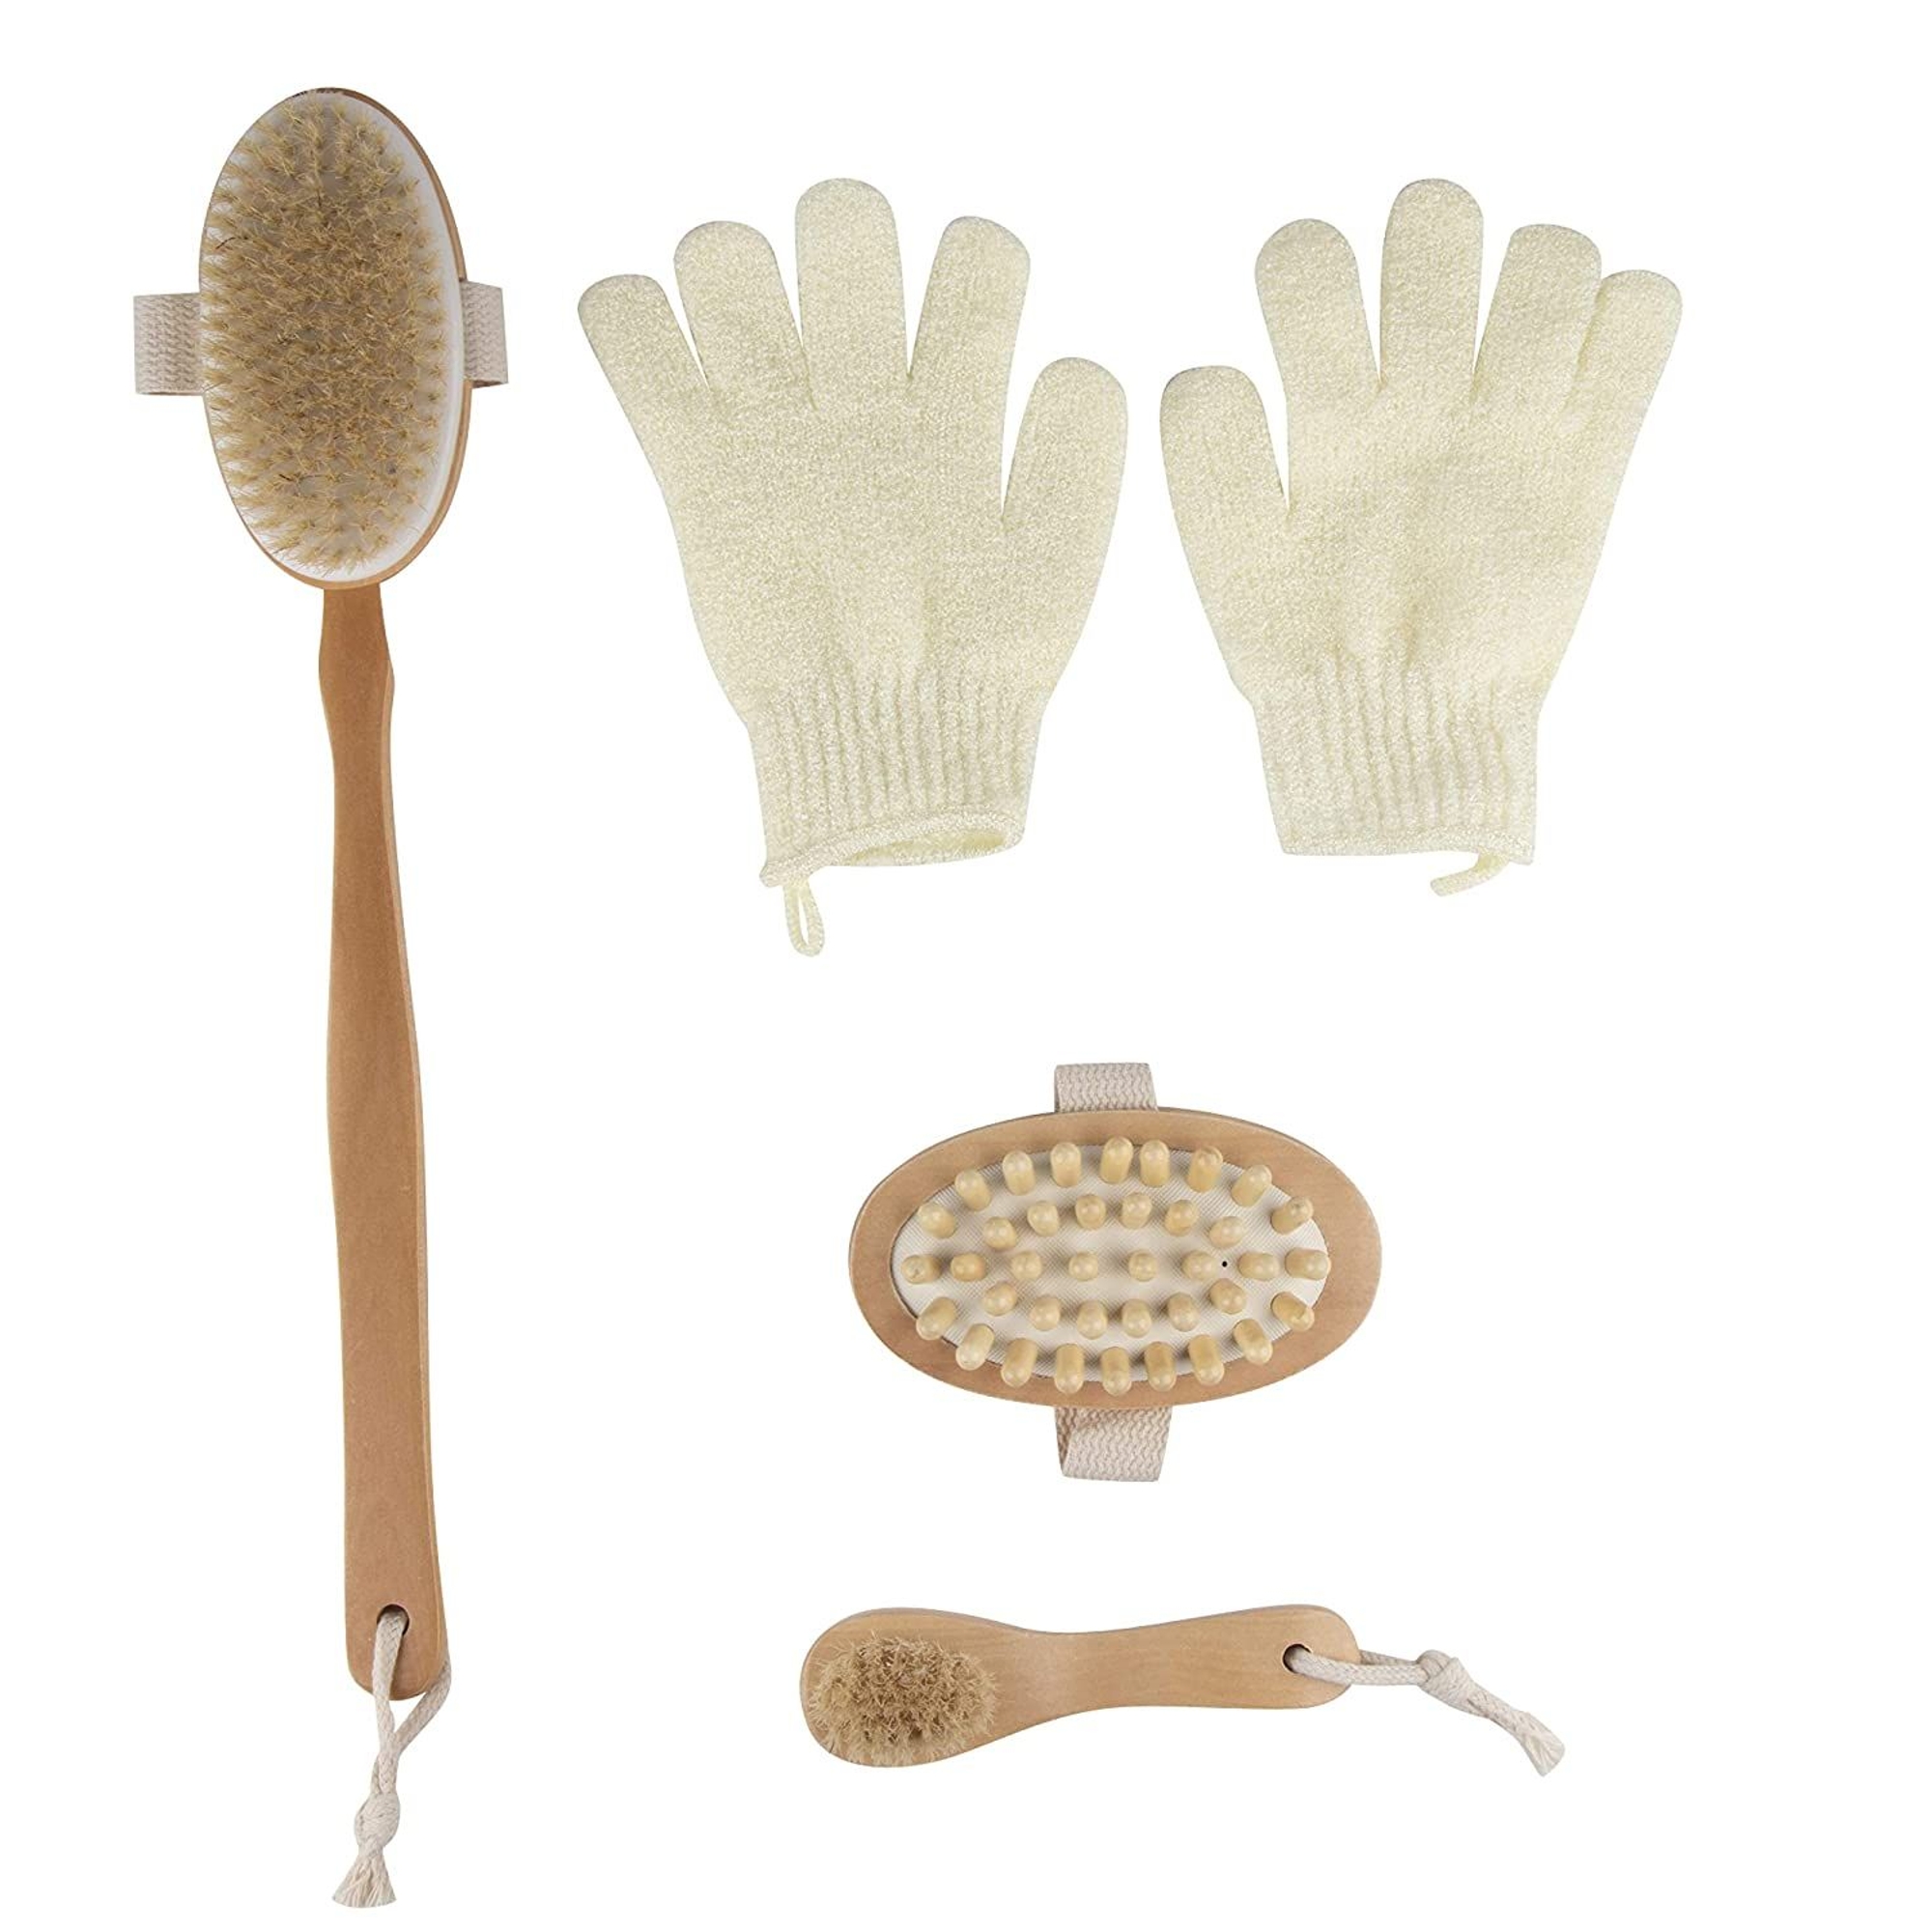 Set of 4 Dry Brushing Body Brush Kit, Natural Bristle Wooden Bath Shower Back Scrubber, Face Skin Cleansing Exfoliator, Anti-cellulite Spa Massager and Exfoliating Gloves by Juvale - image 1 of 9